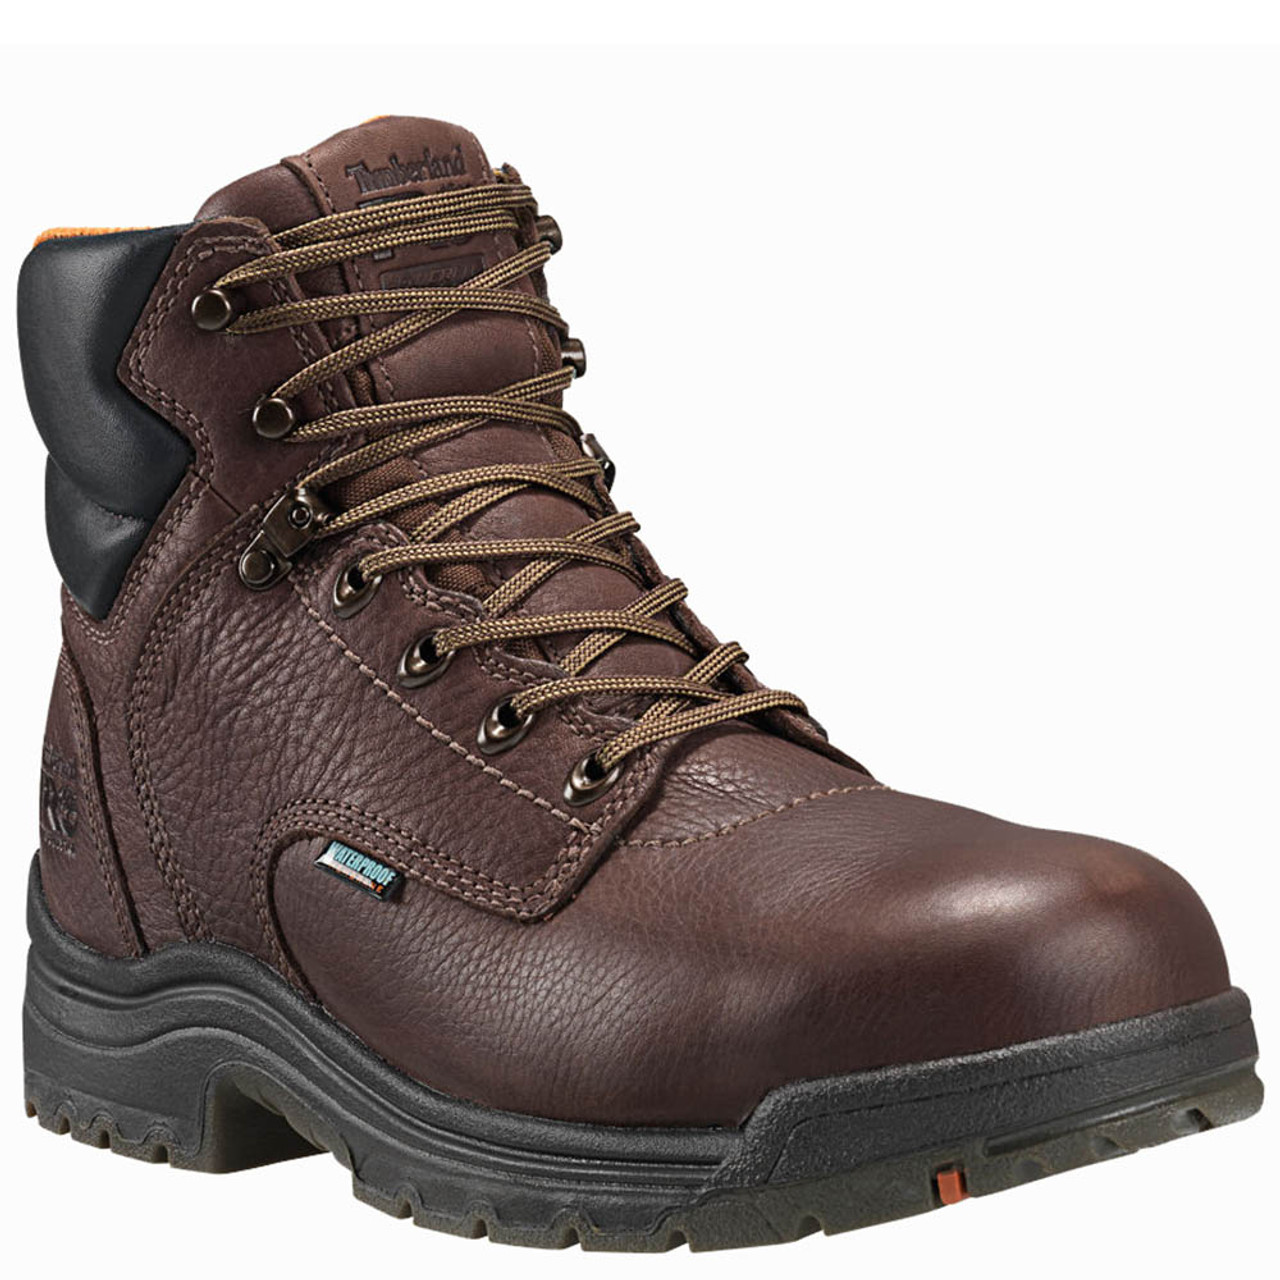 men's non insulated work boots